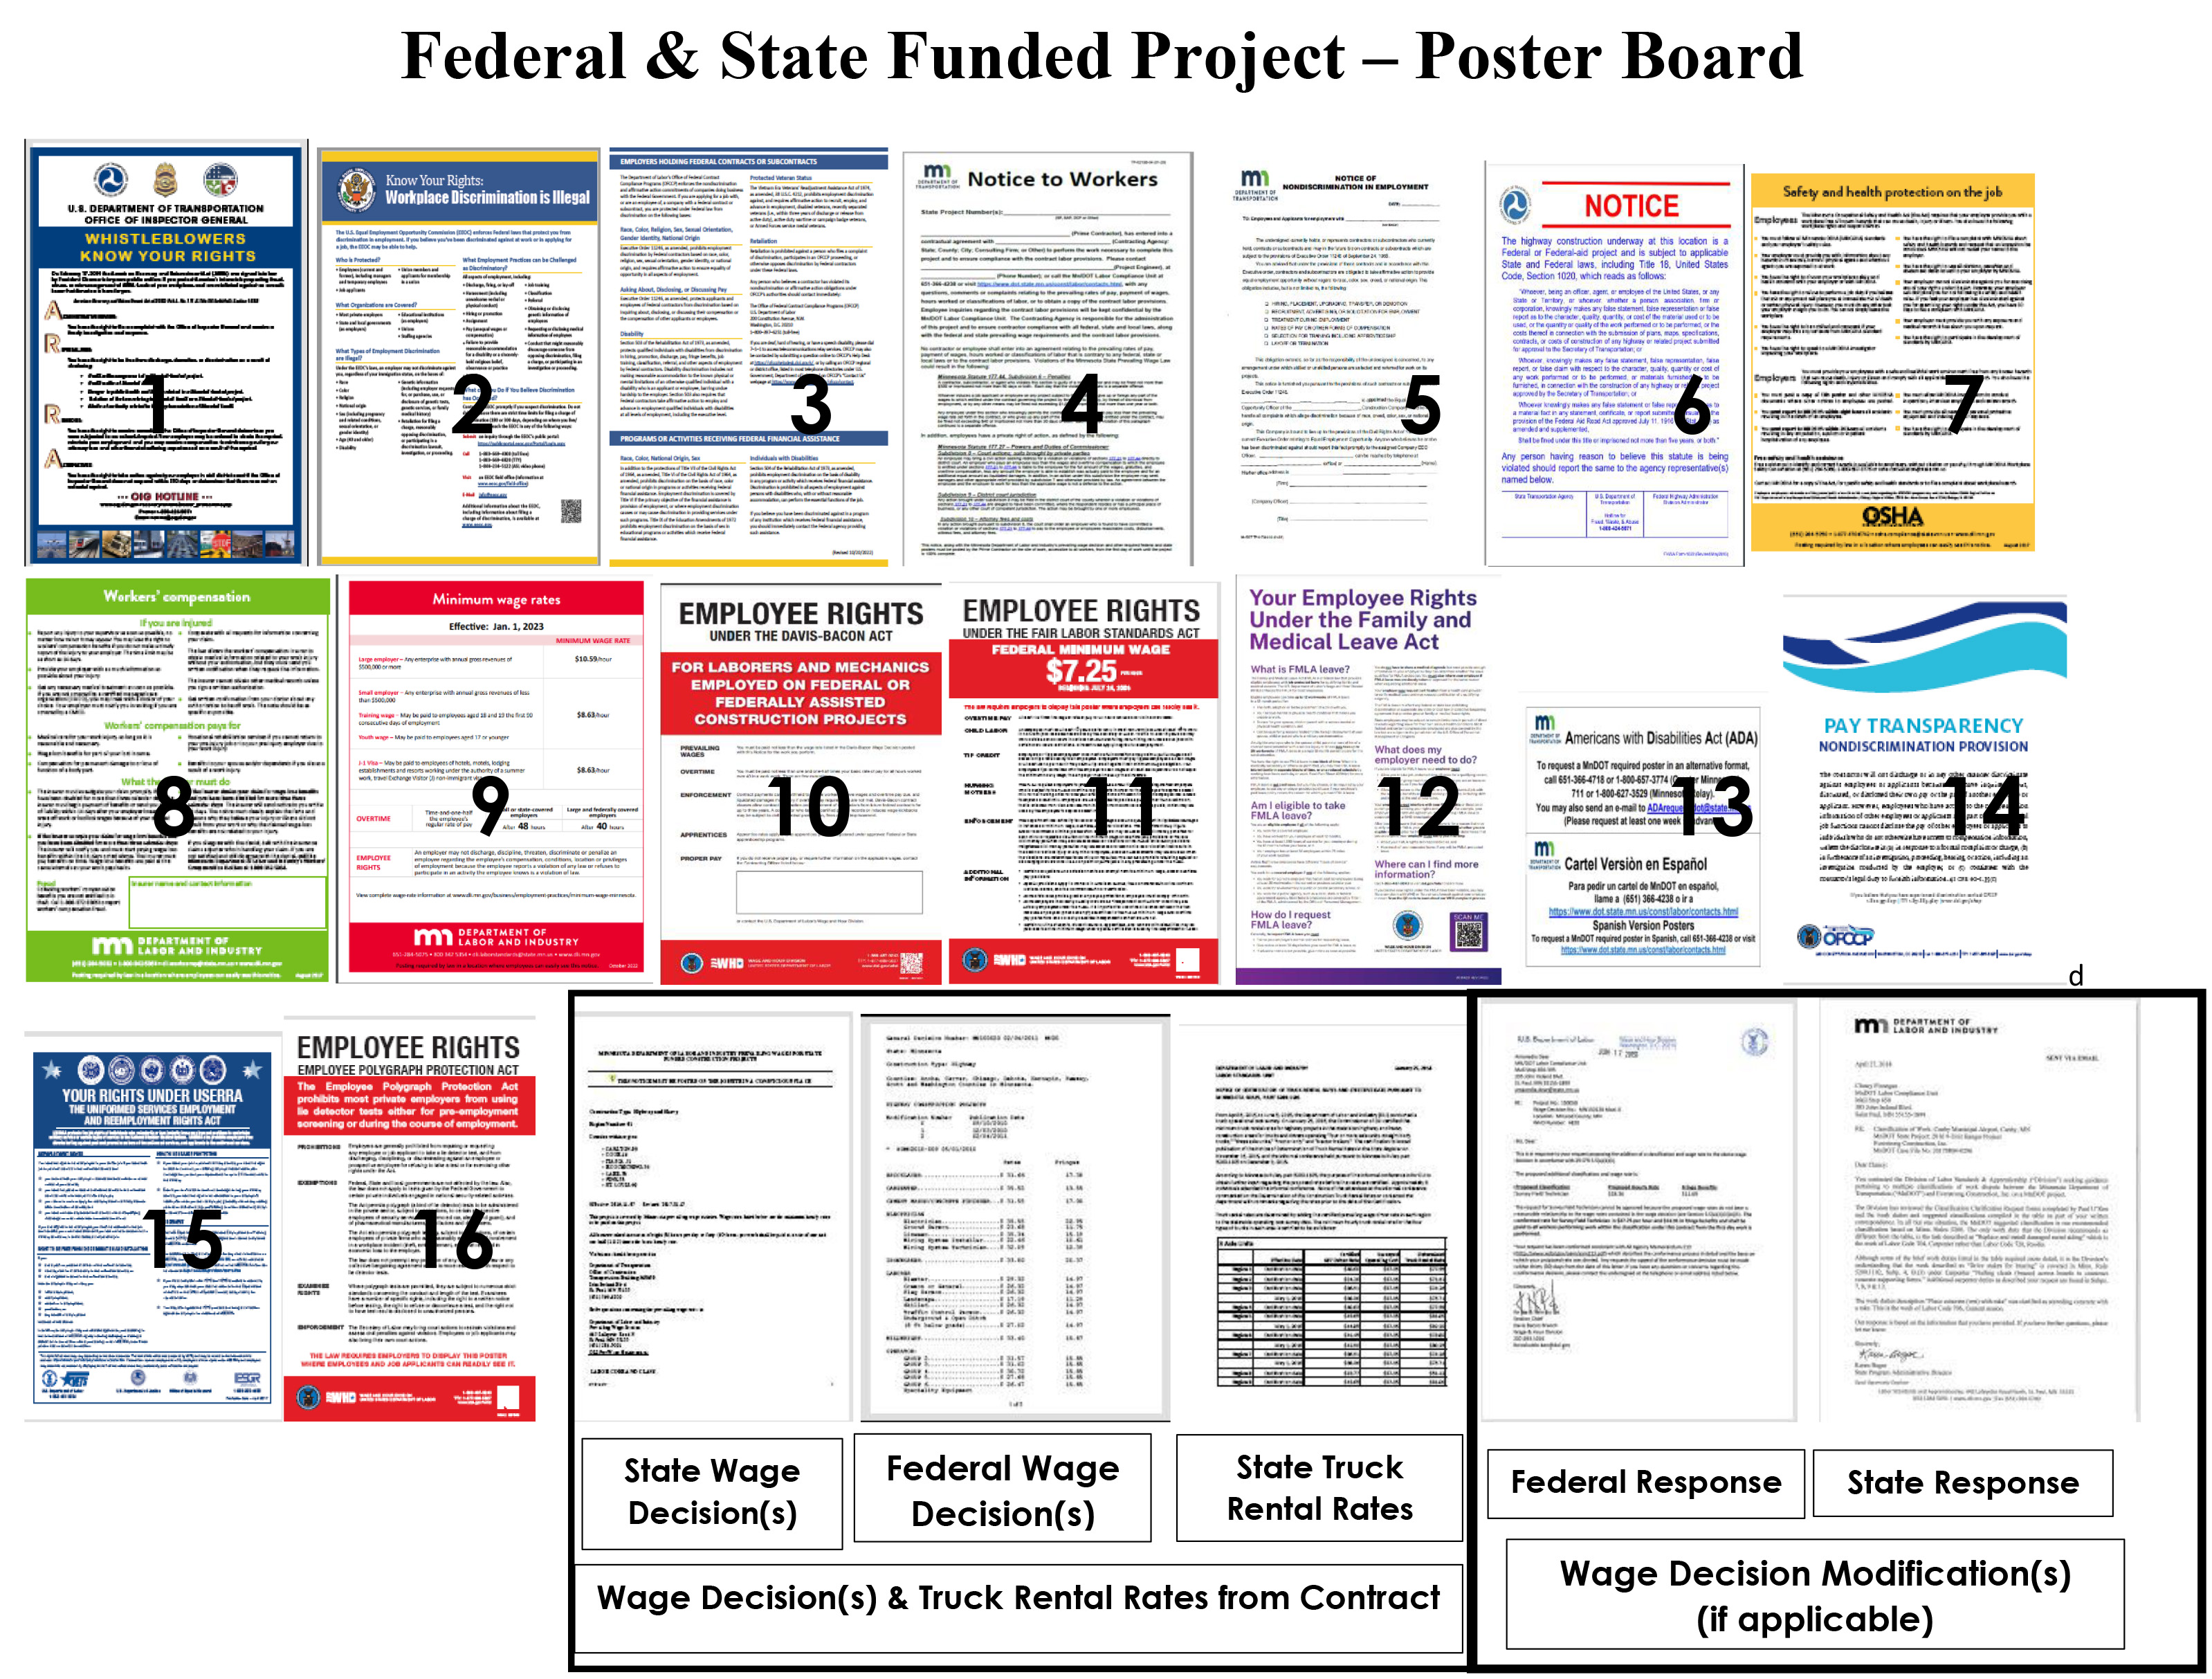 An image showing posterboards including posters such as whistleblowers, the law, notice to workers, employee rights, Americans with Disabilities Act.